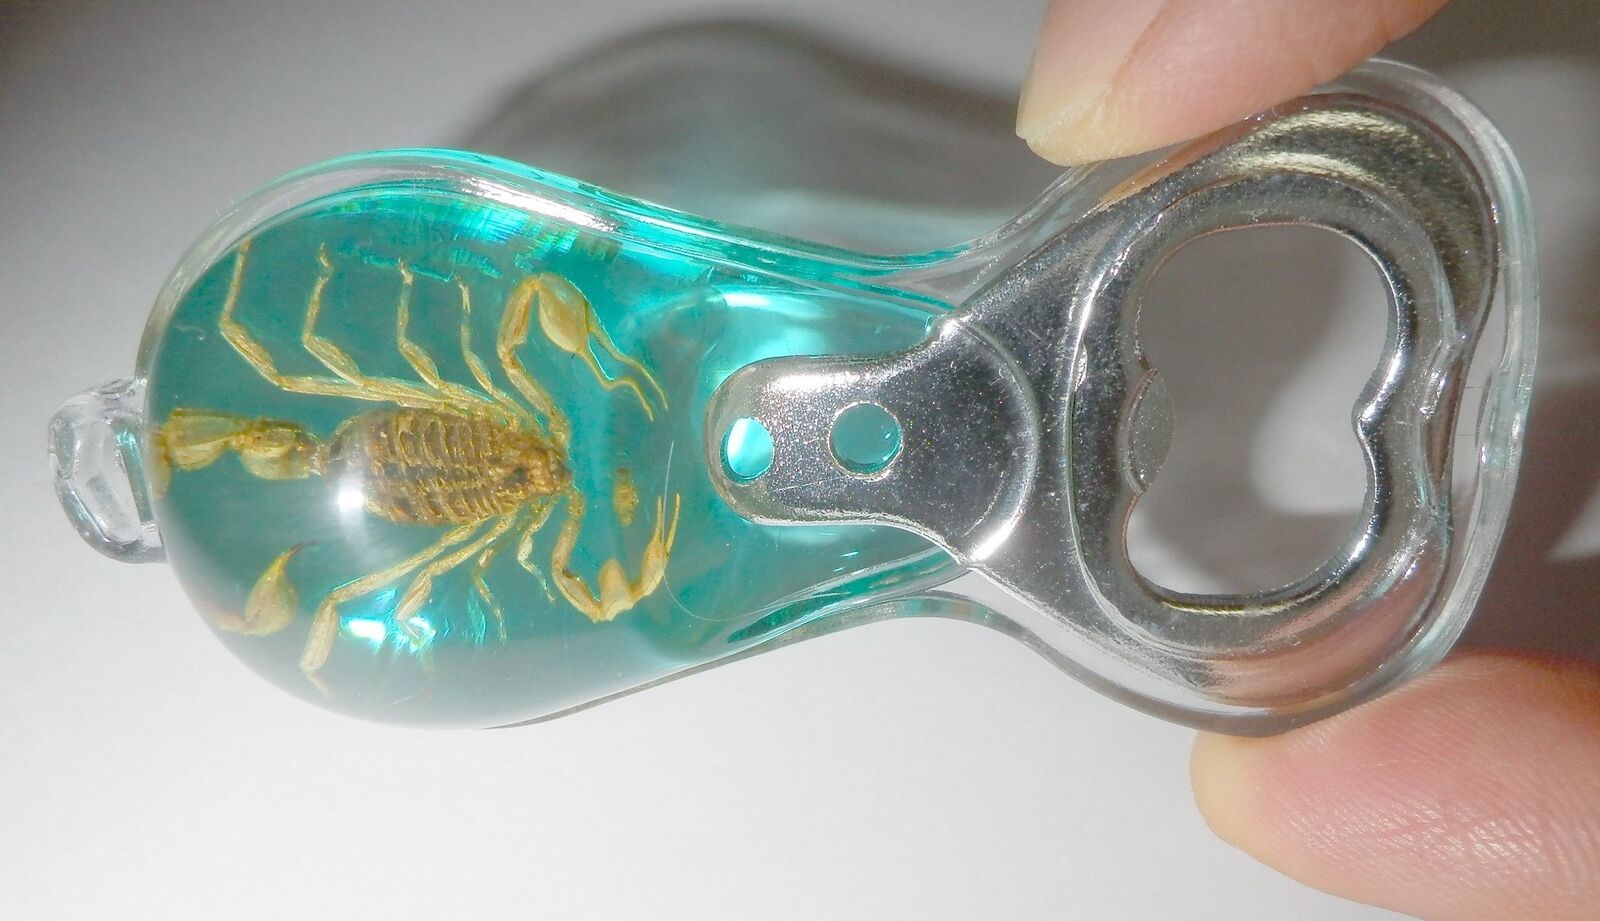 Insect Small Bottle Opener Golden Scorpion Mesobuthus martensii Clear Blue